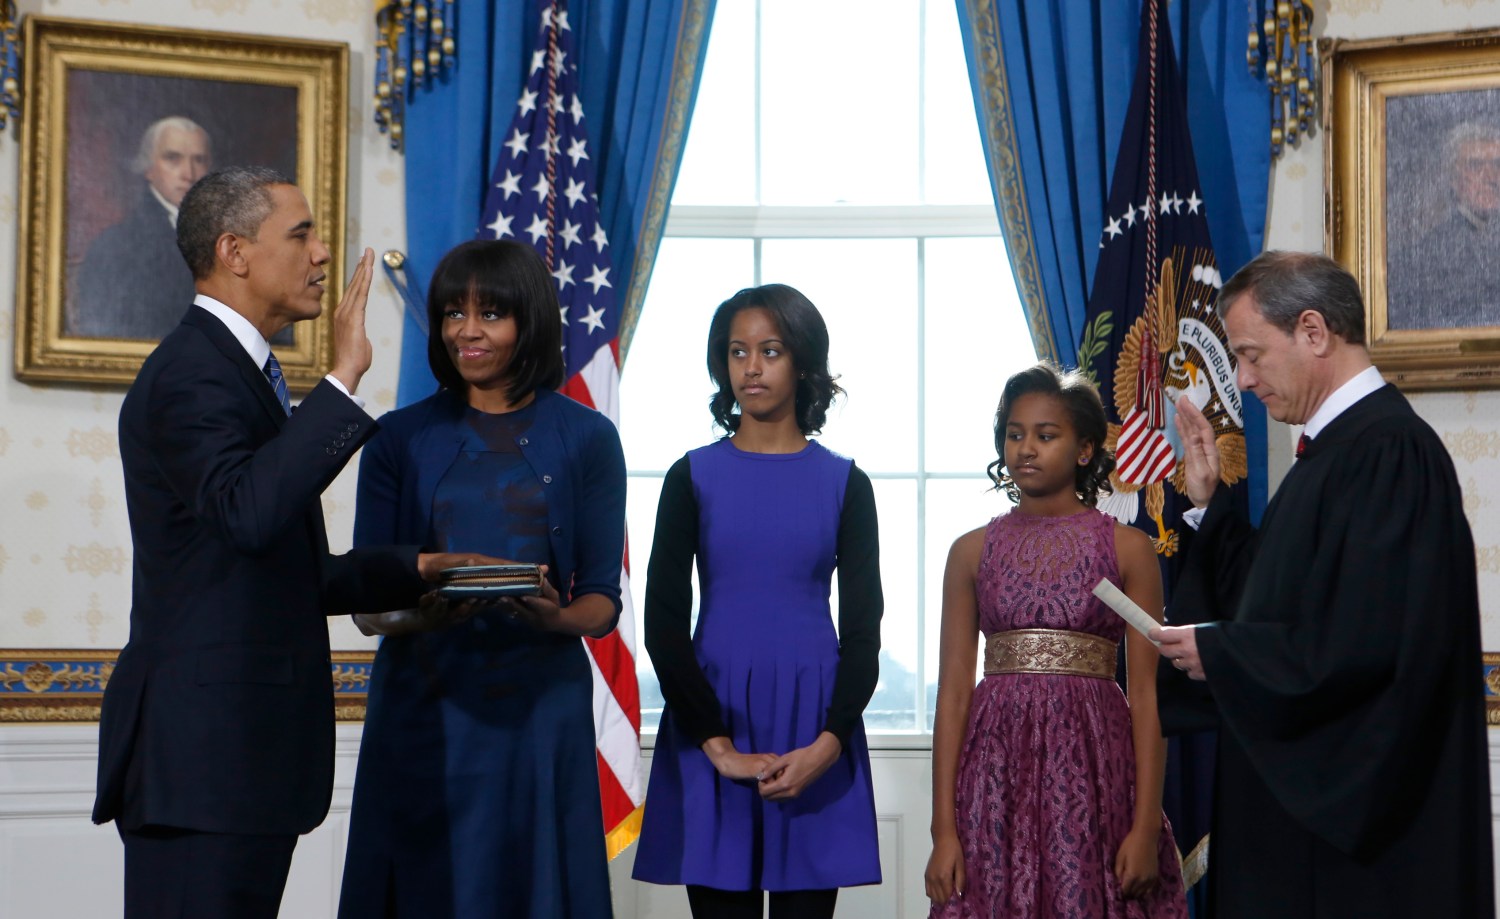 U.S. President Obama takes the oath of office from U.S. Supreme Court Chief Justice Roberts (R) as first lady Michelle Obama holds the bible and daughters Malia and Sasha look on in the Blue Room of the White House in Washington